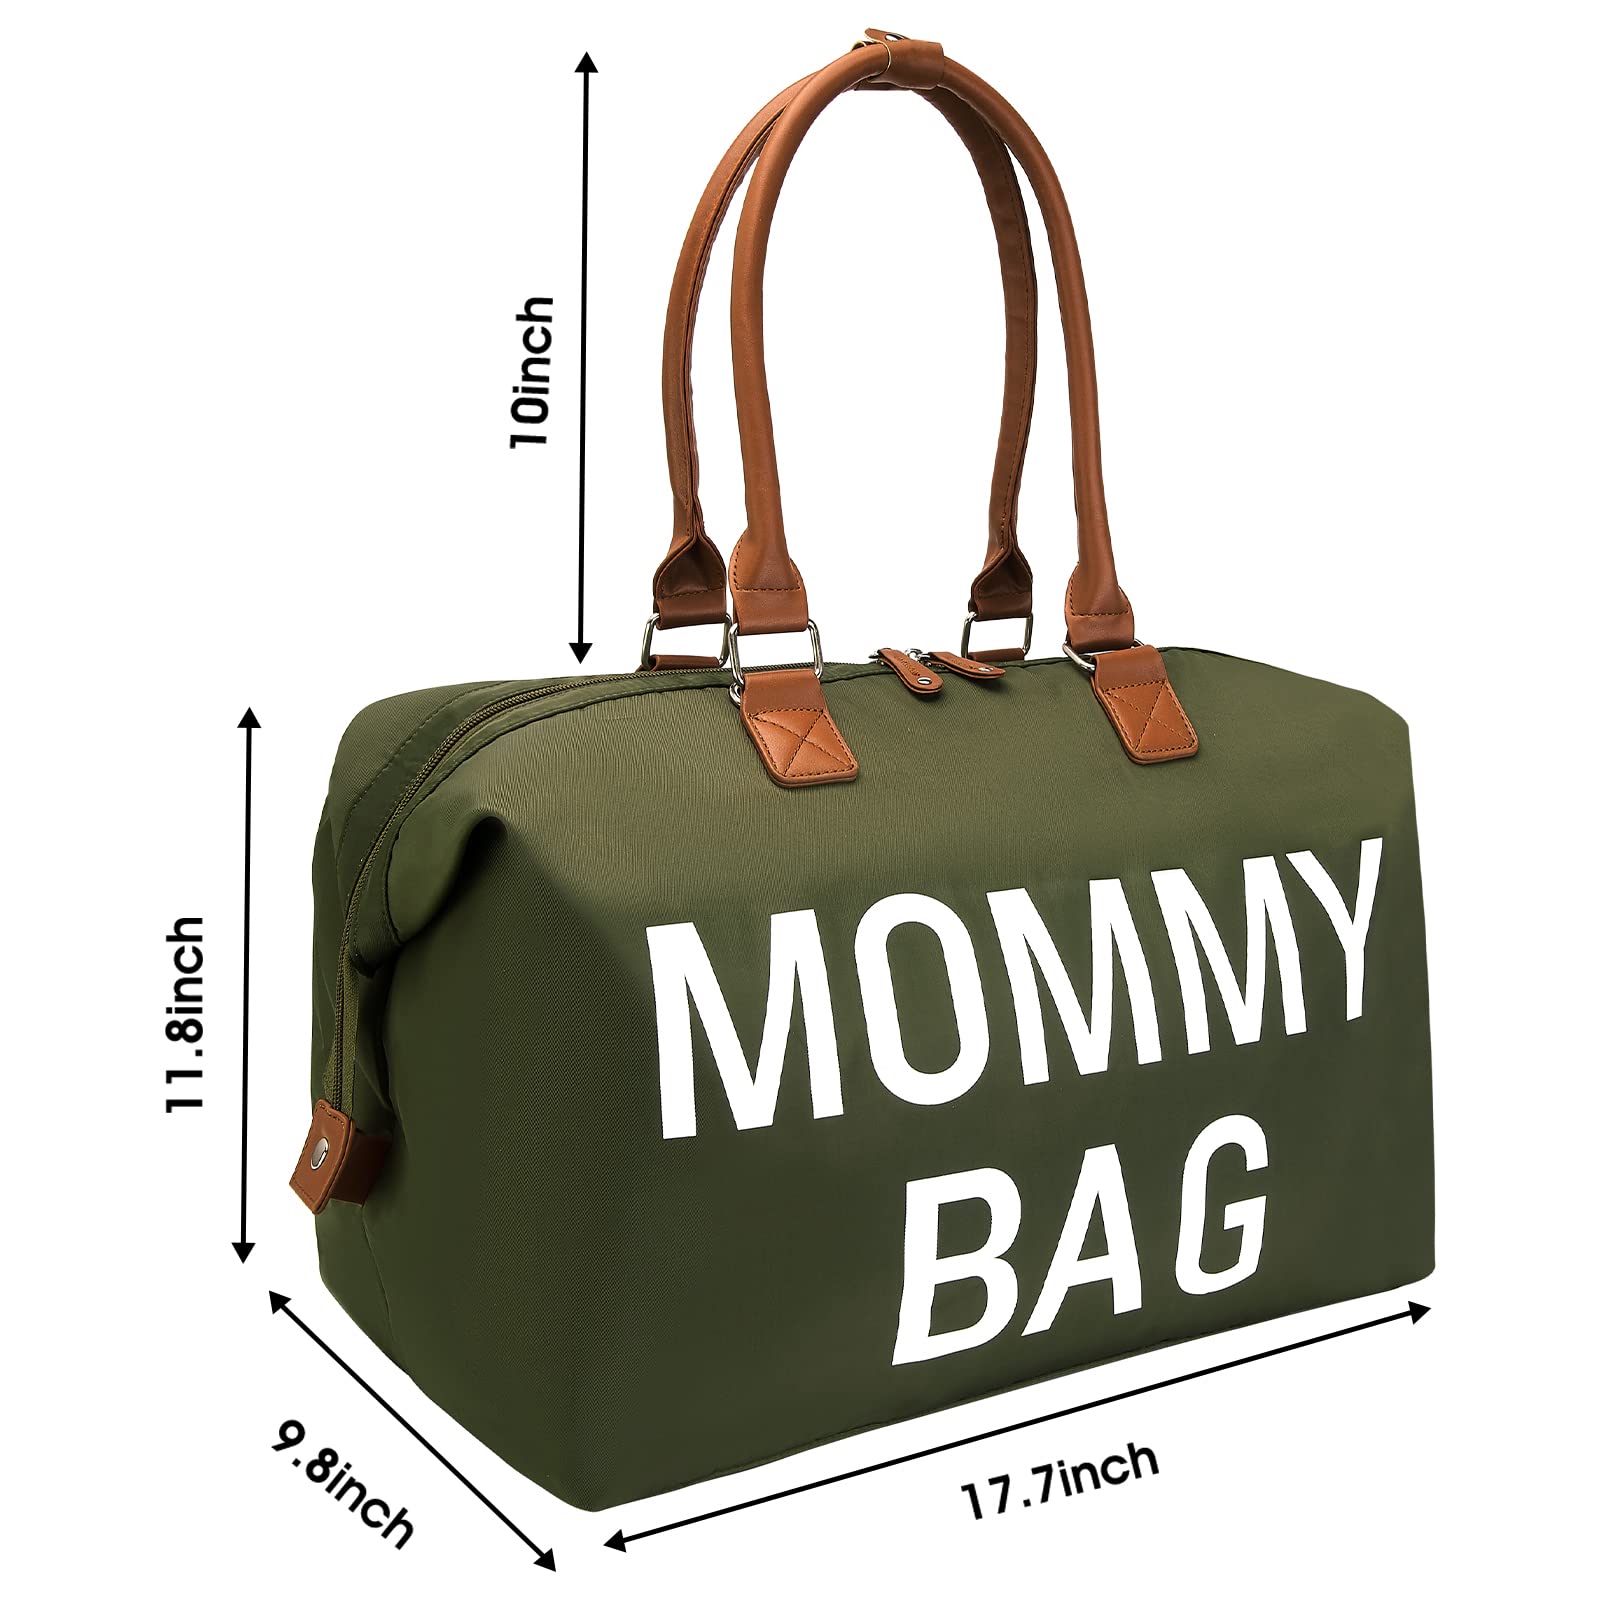 printe Mommy Bag for Hospital, Large Capacity Diaper Bag Tote for 2 Kids, Waterproof Hospital Bag for Labor and Delivery with Straps, Travel Baby Diaper Bag, Olive Green